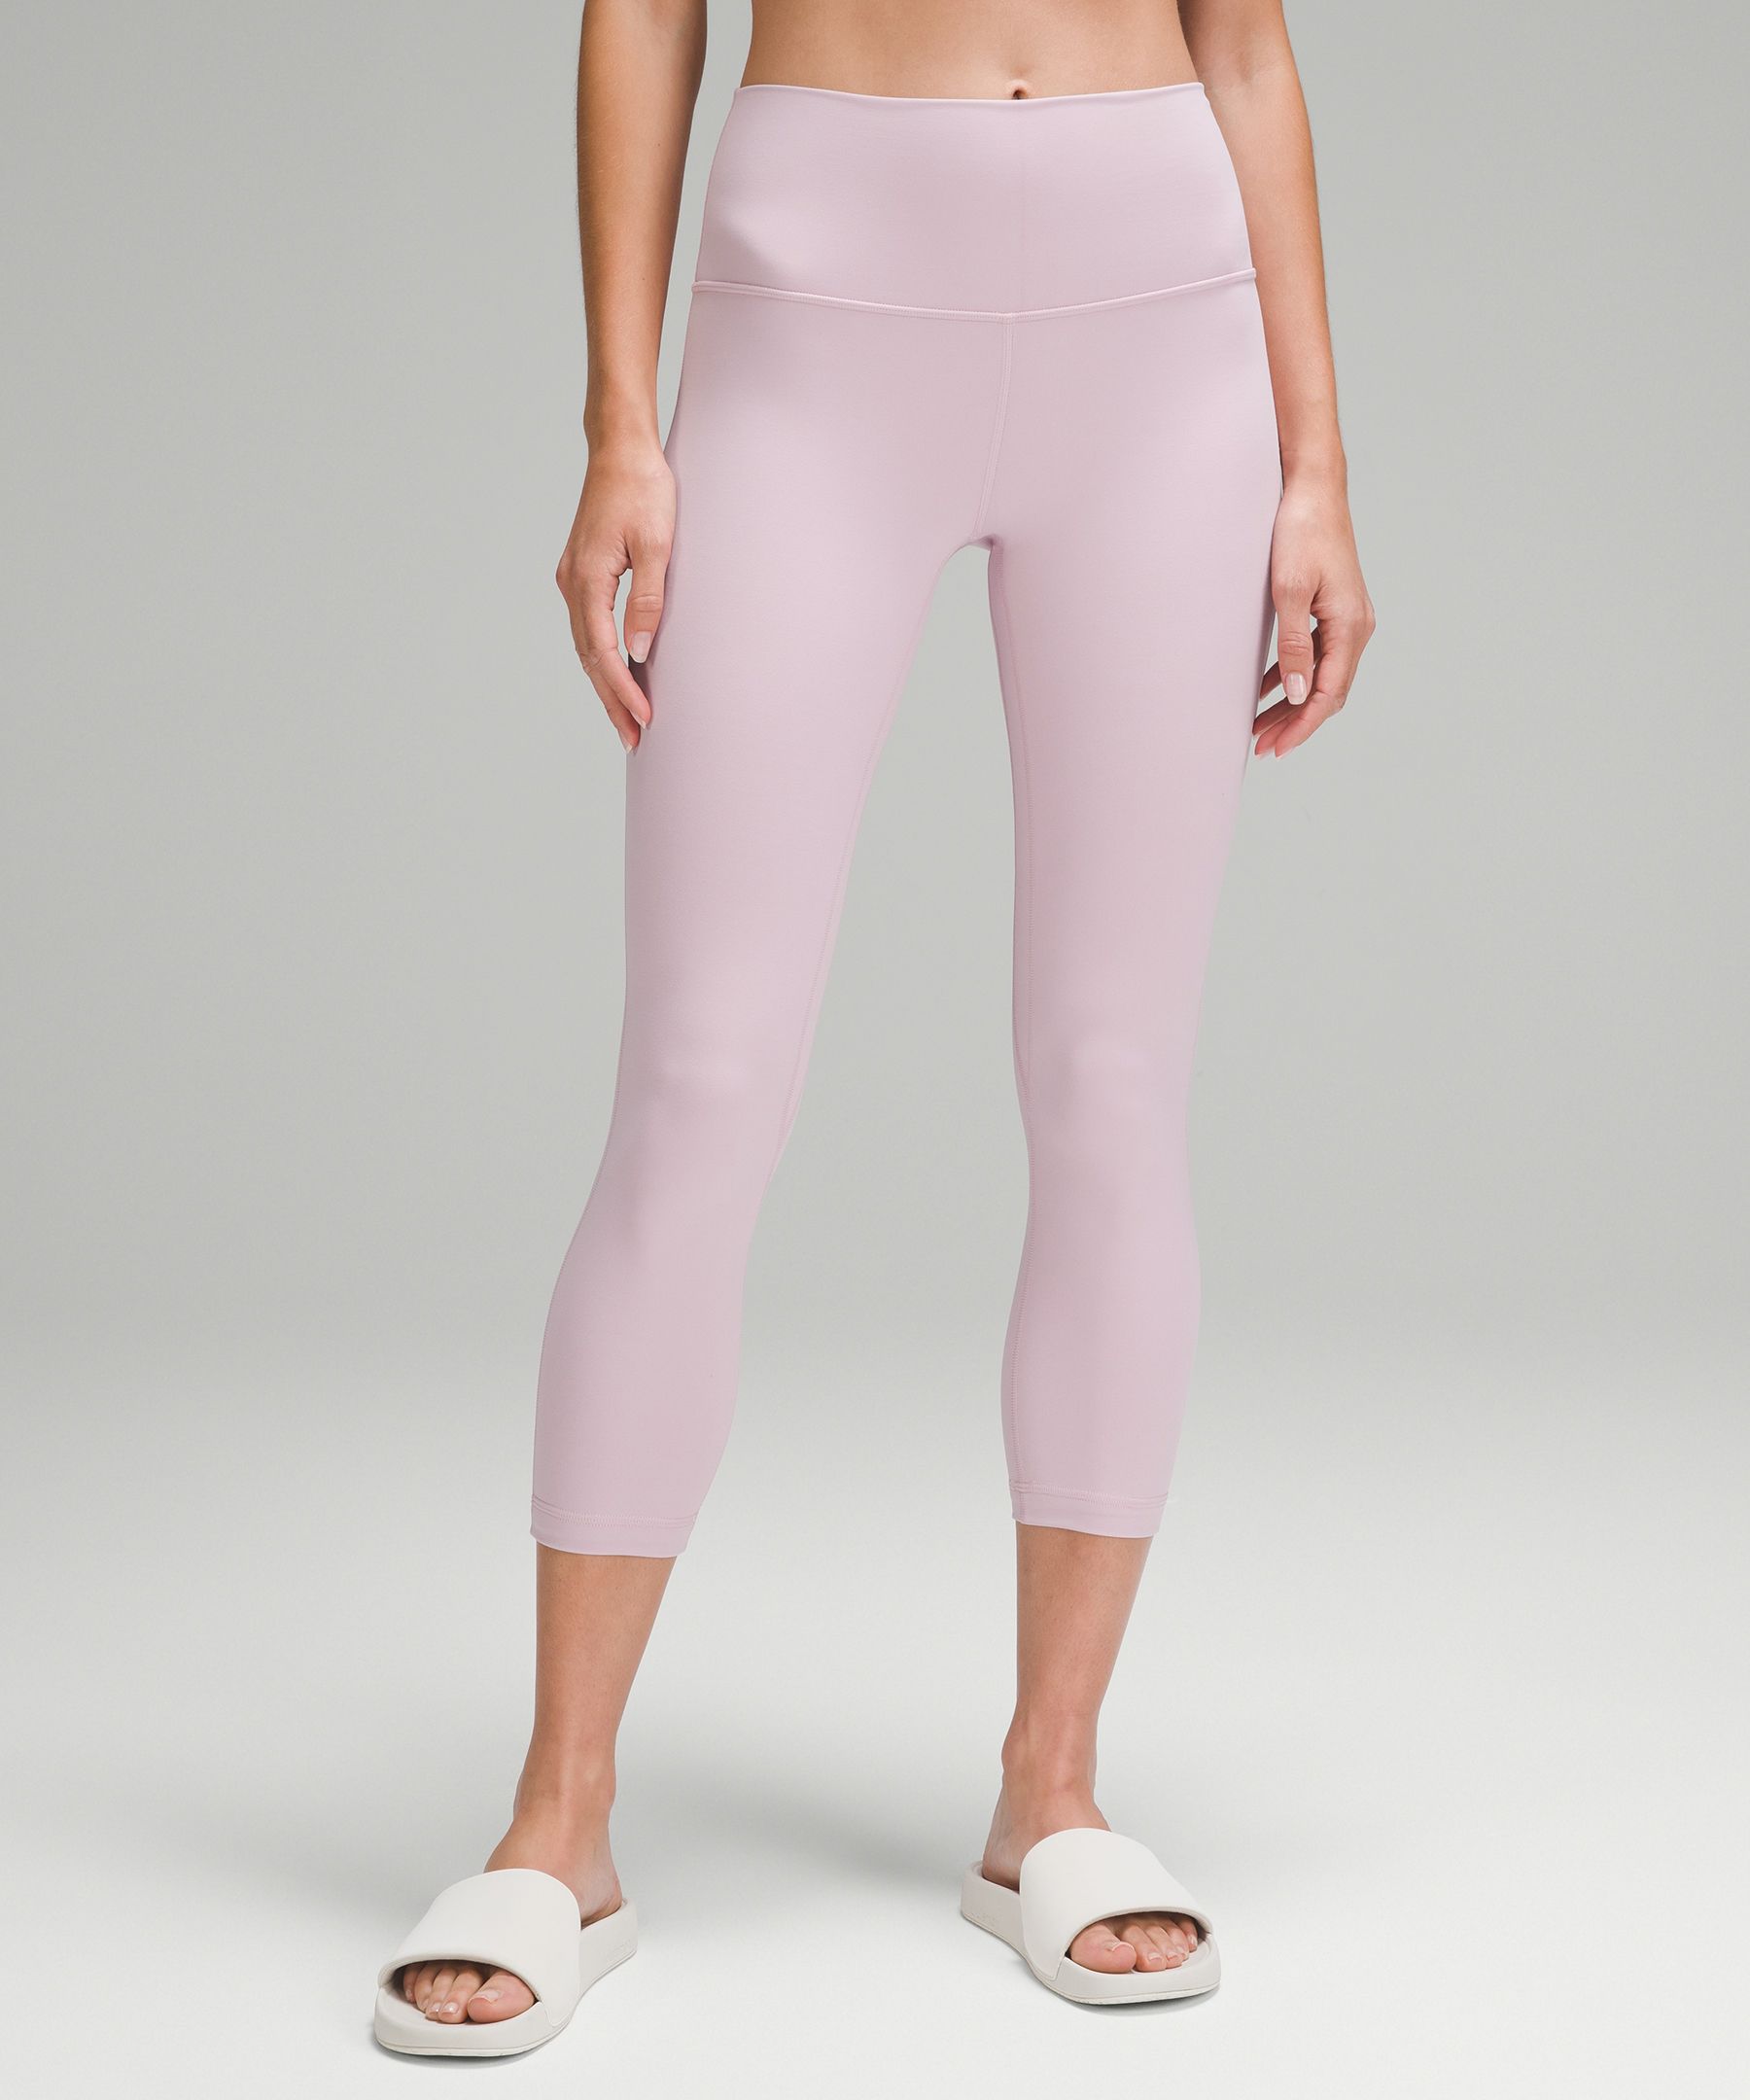 Sonic pink Align legging size 6 and white wunder train strappy